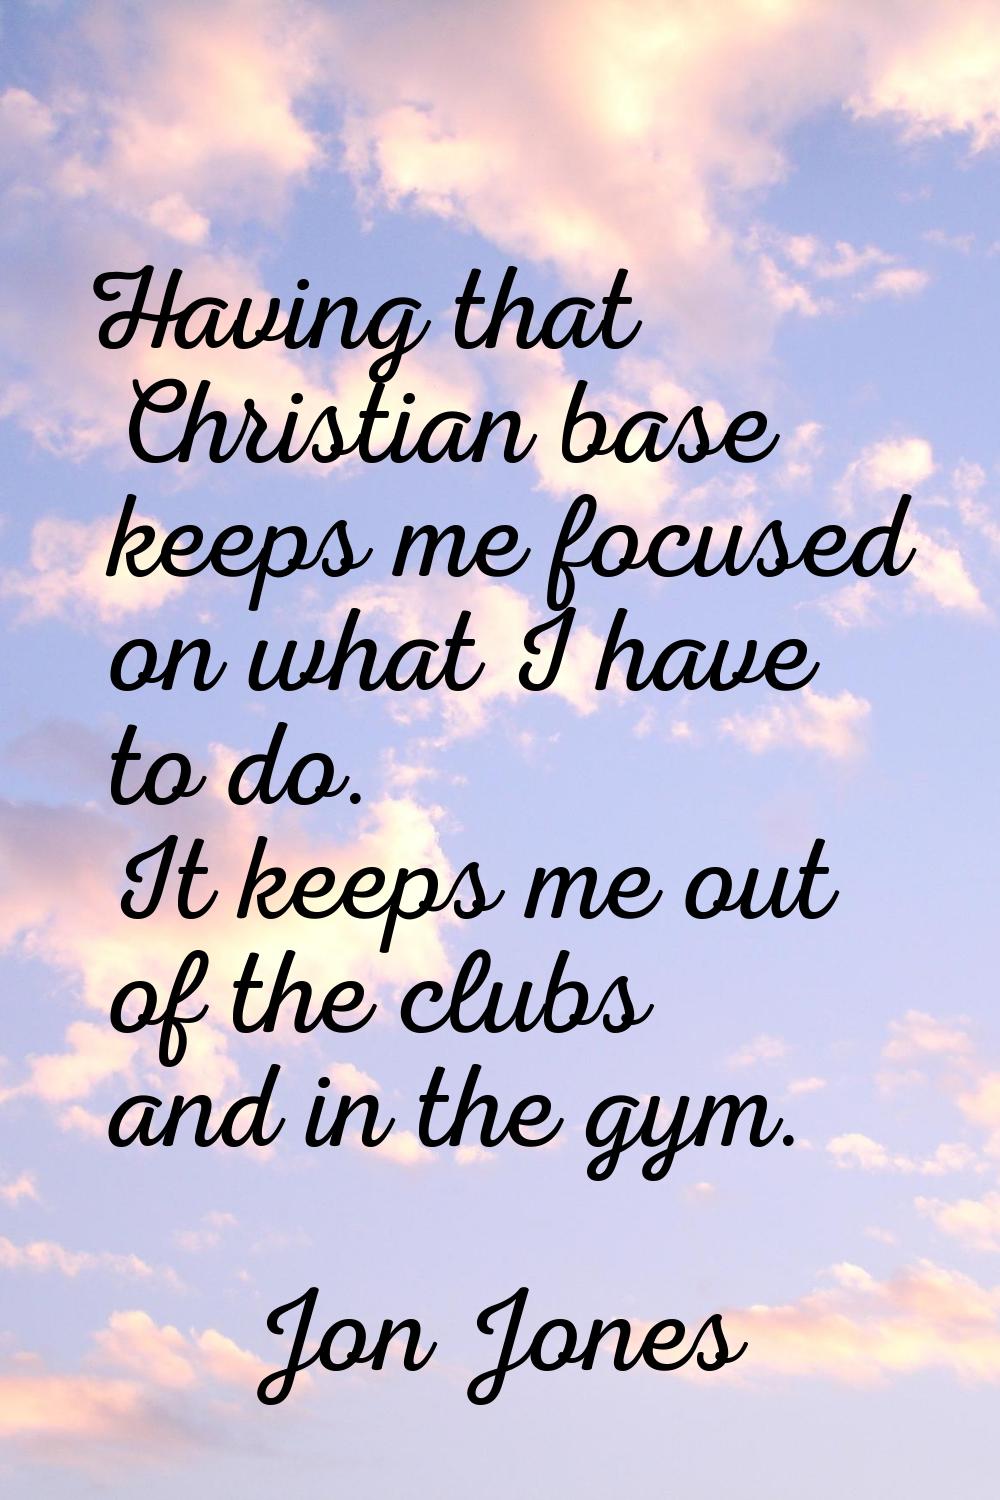 Having that Christian base keeps me focused on what I have to do. It keeps me out of the clubs and 